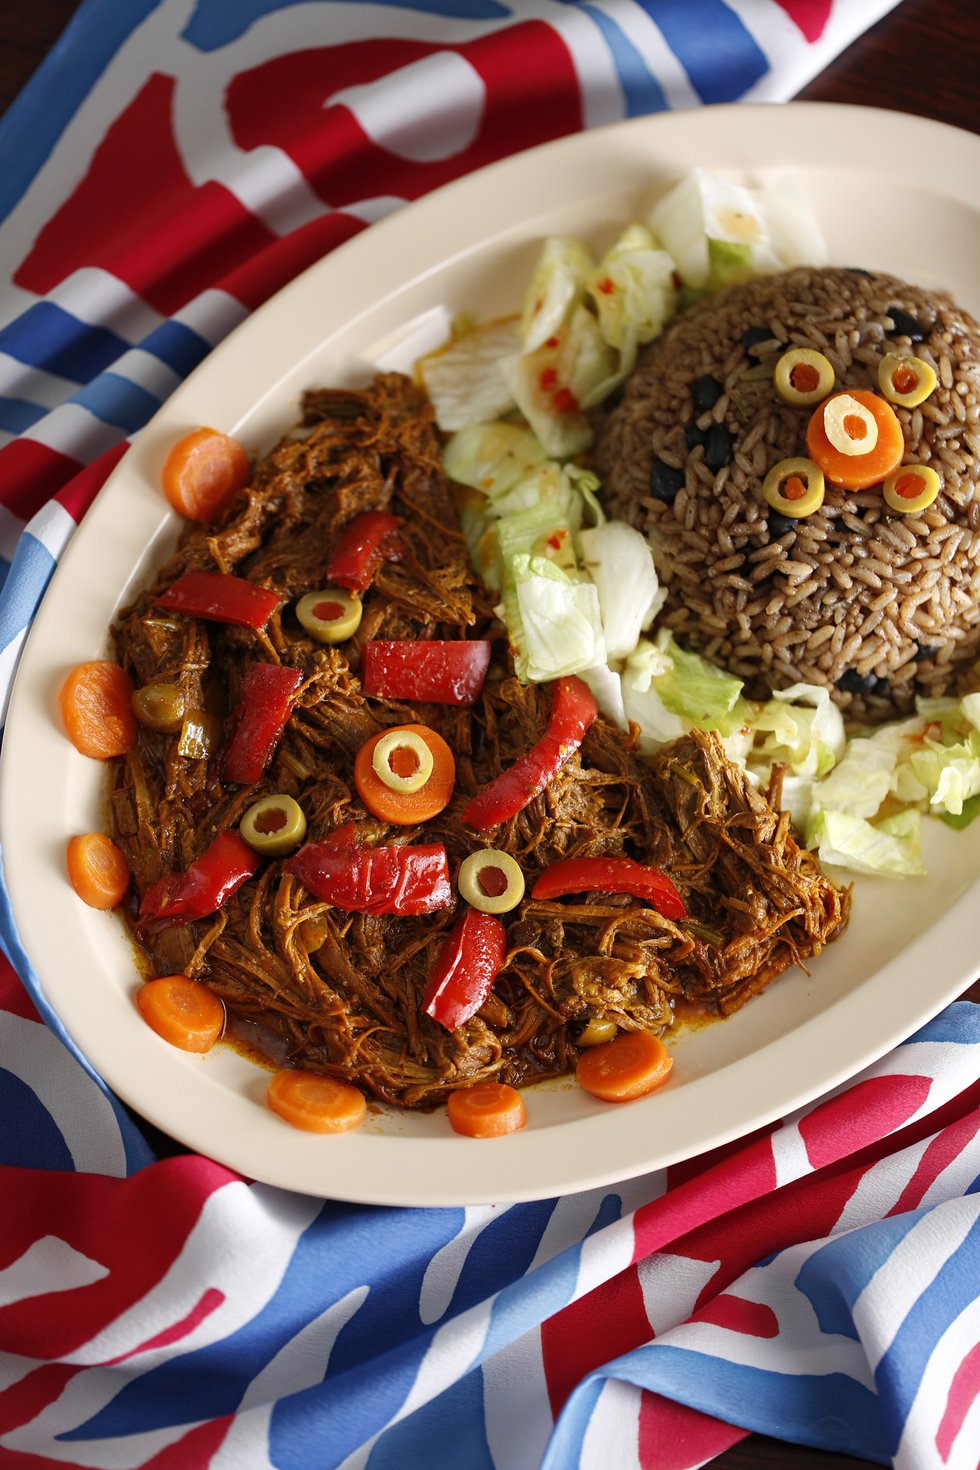 Havana’s Pilón: Ropa Vieja is a traditional dish of shredded beef in a light tomato sauce.